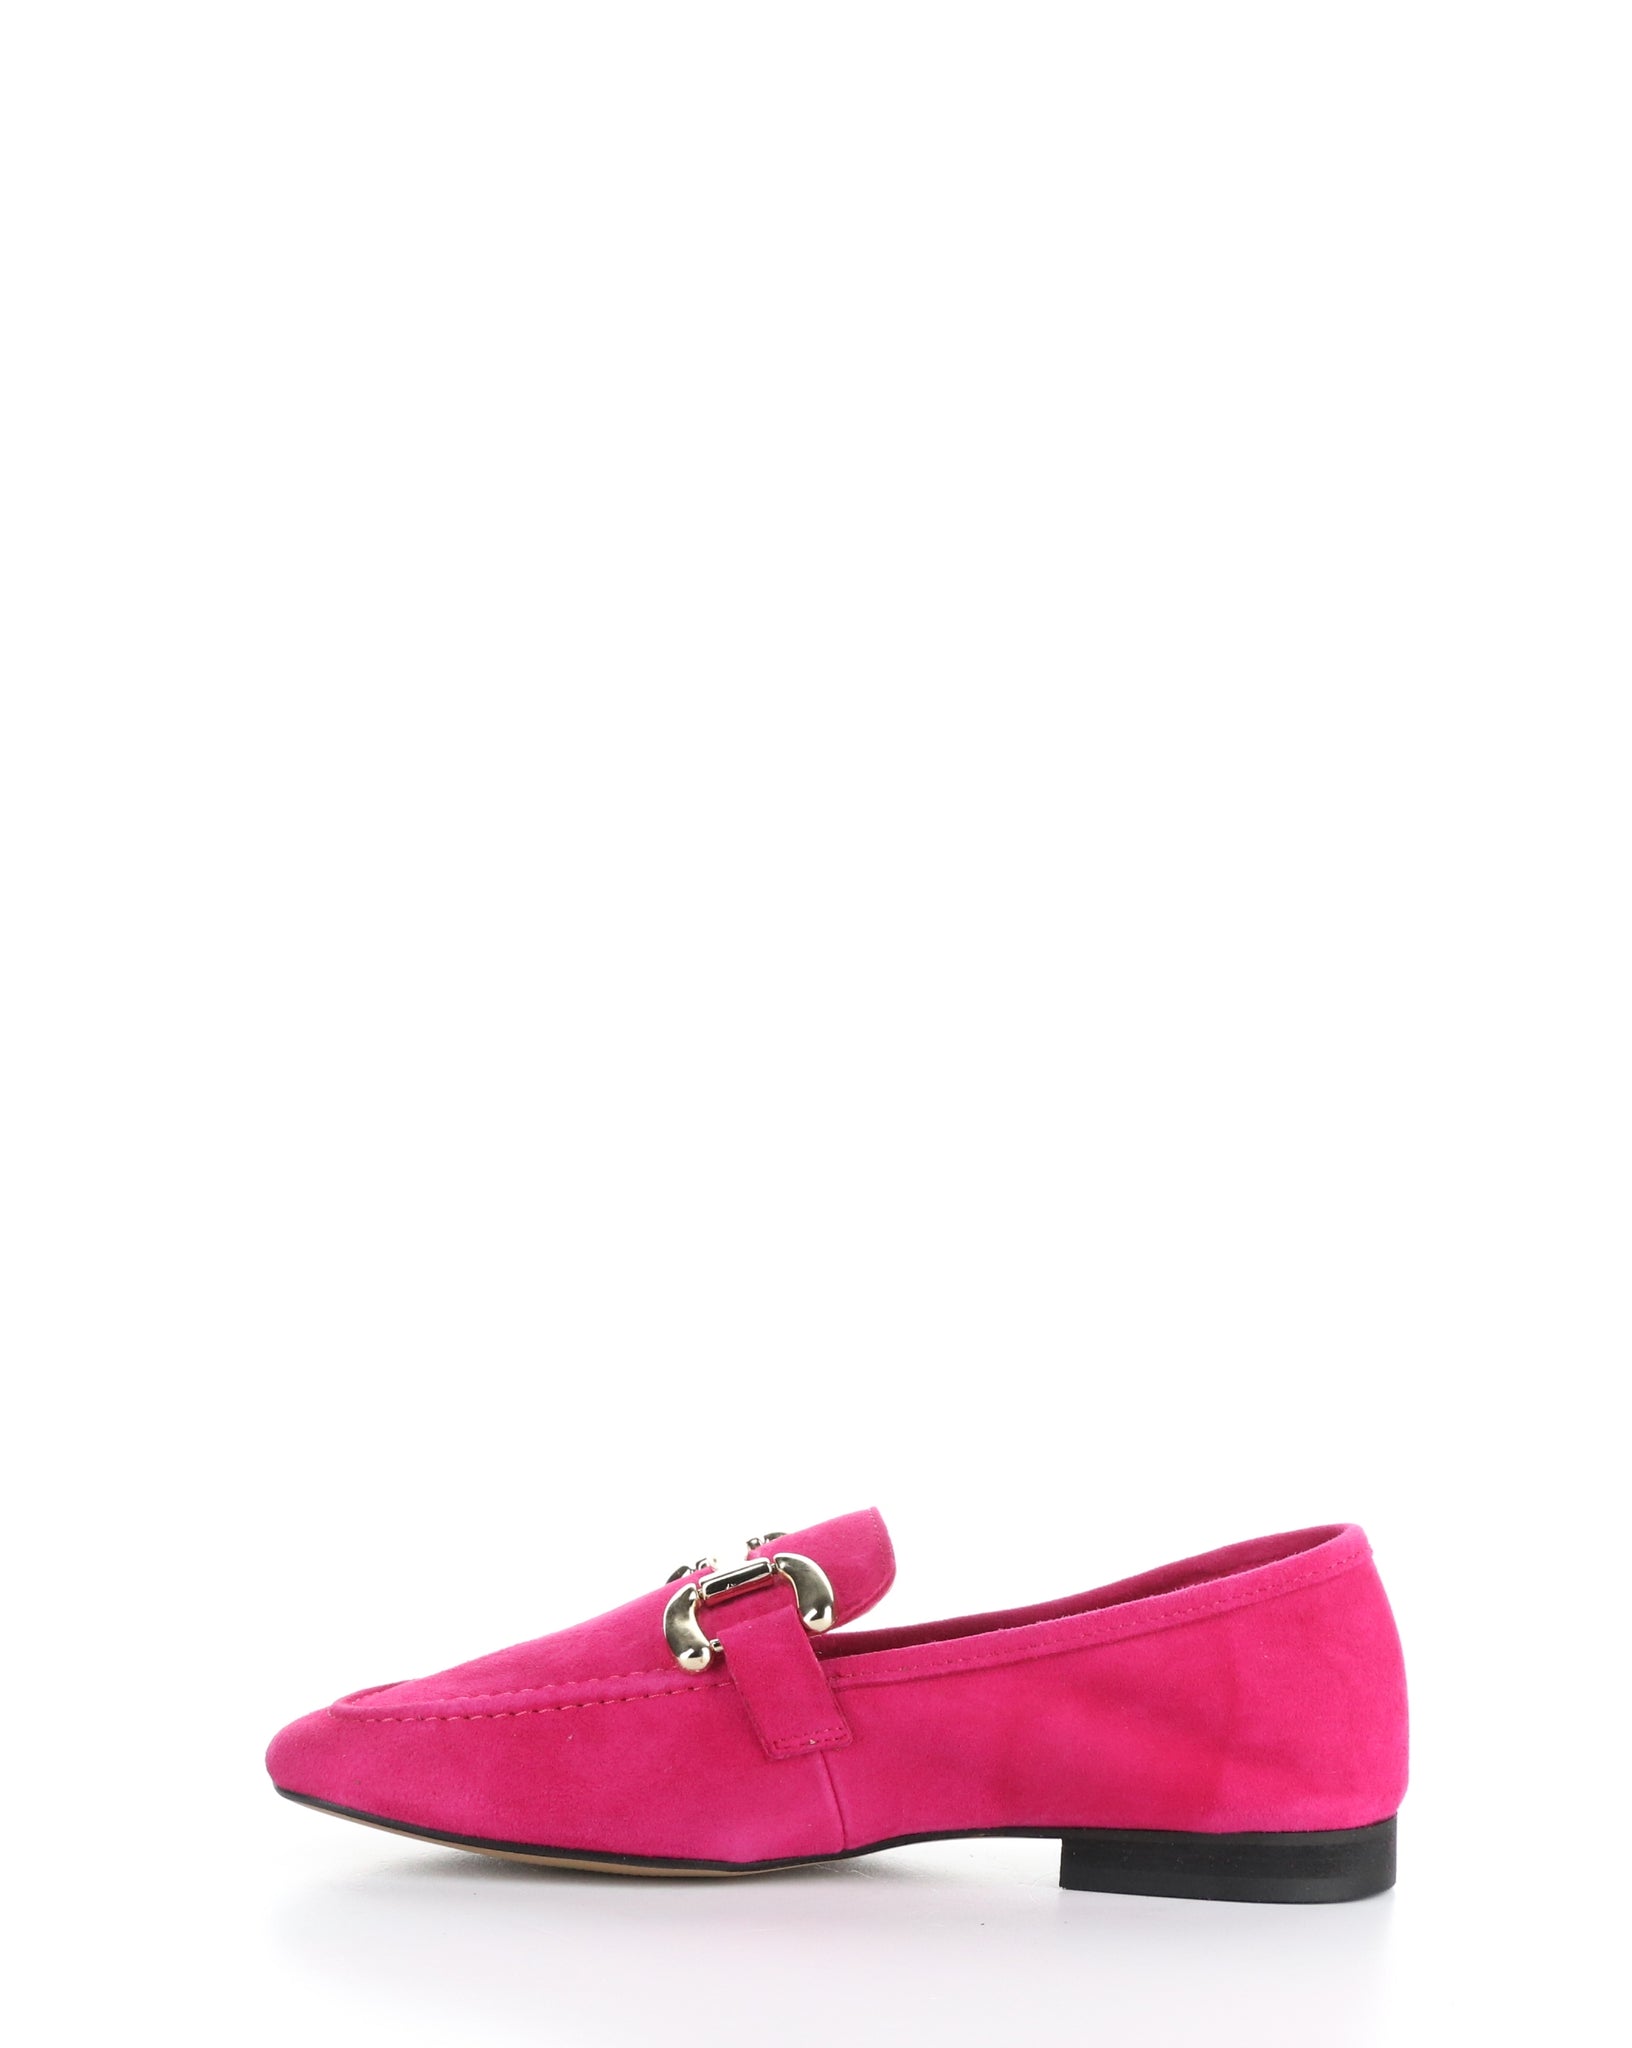 Bos &Co "Macie" Fuchsia leather loafer